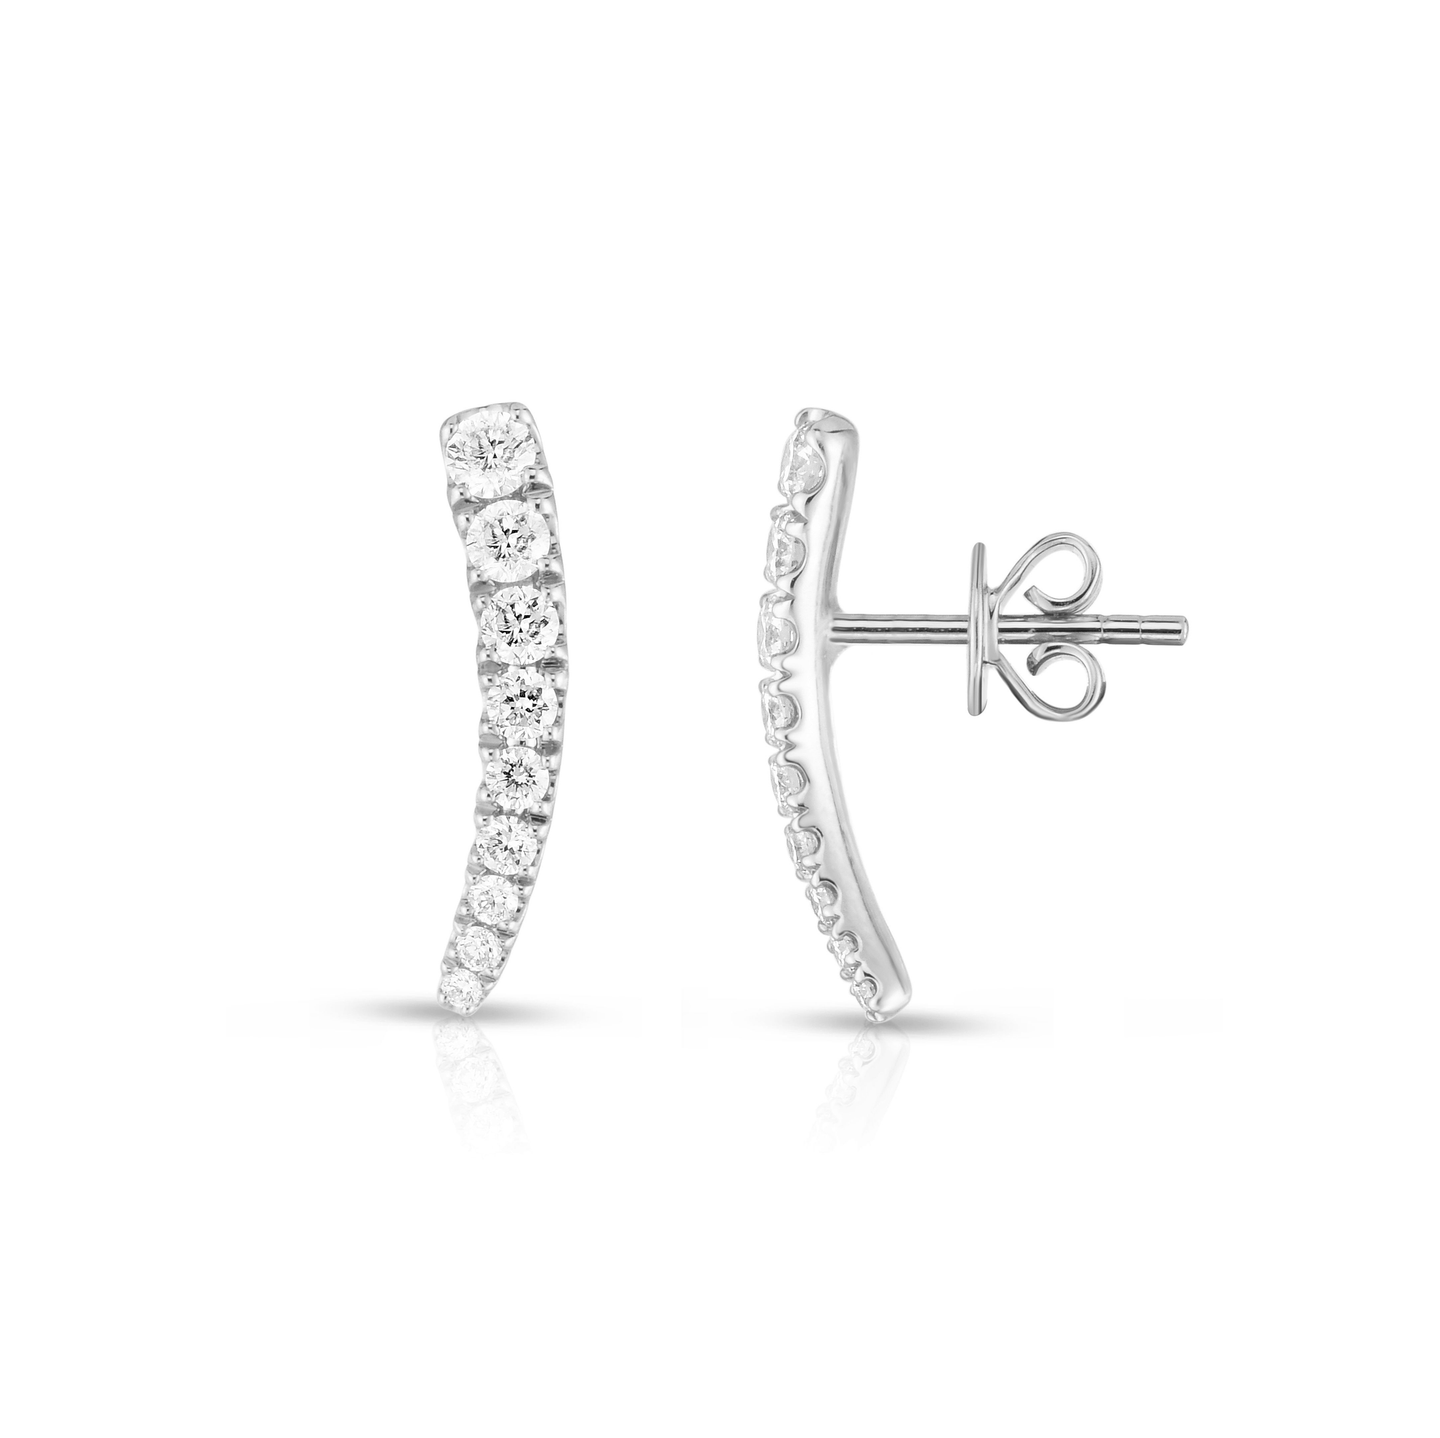 Sabel 14K White Gold Round Diamond Curved Climber Earrings